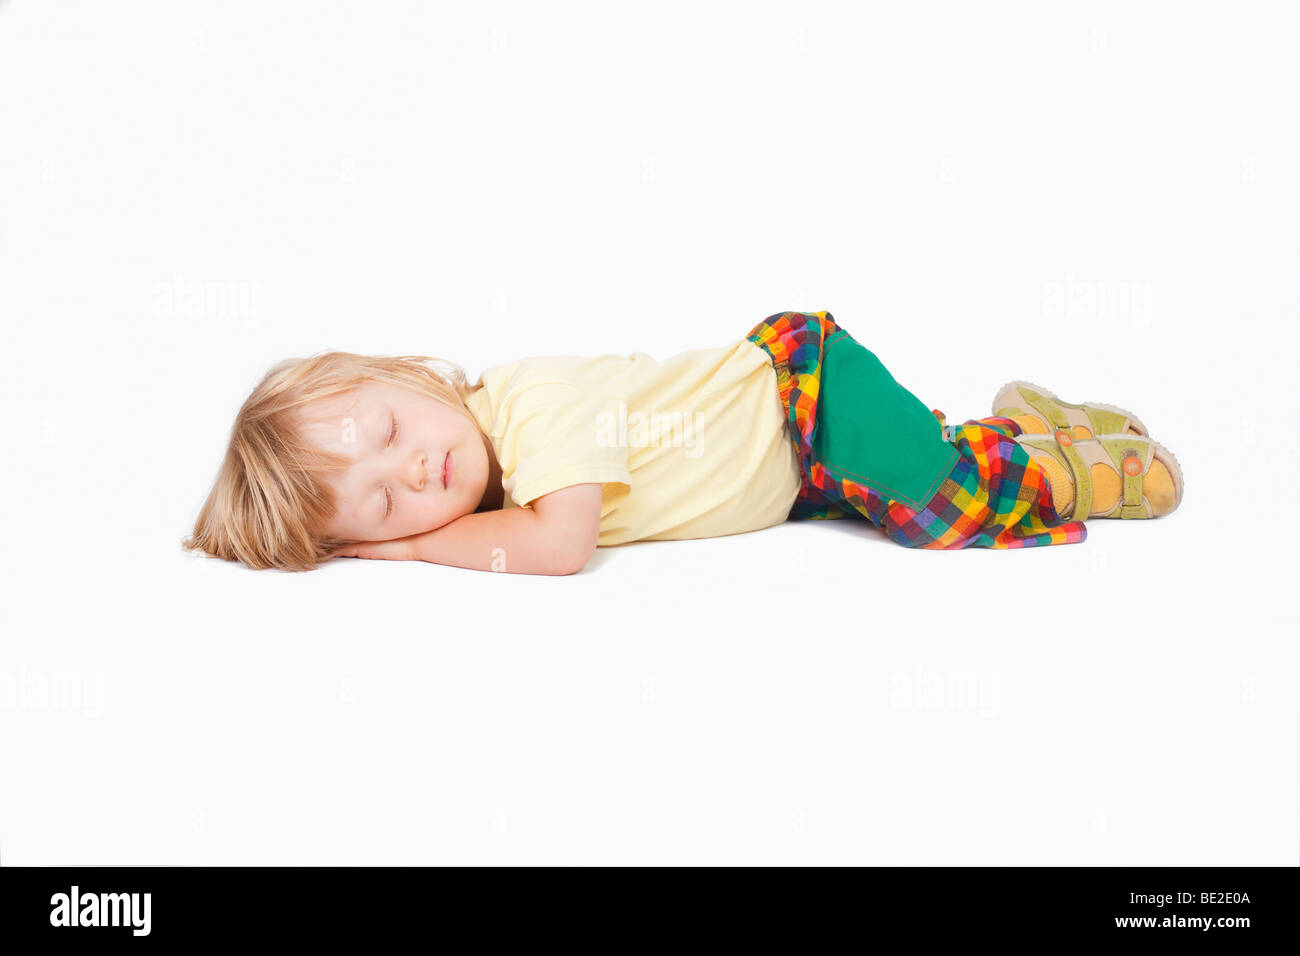 Boy With Long Blond Hair Sleeping On The Floor Clipping Path Stock